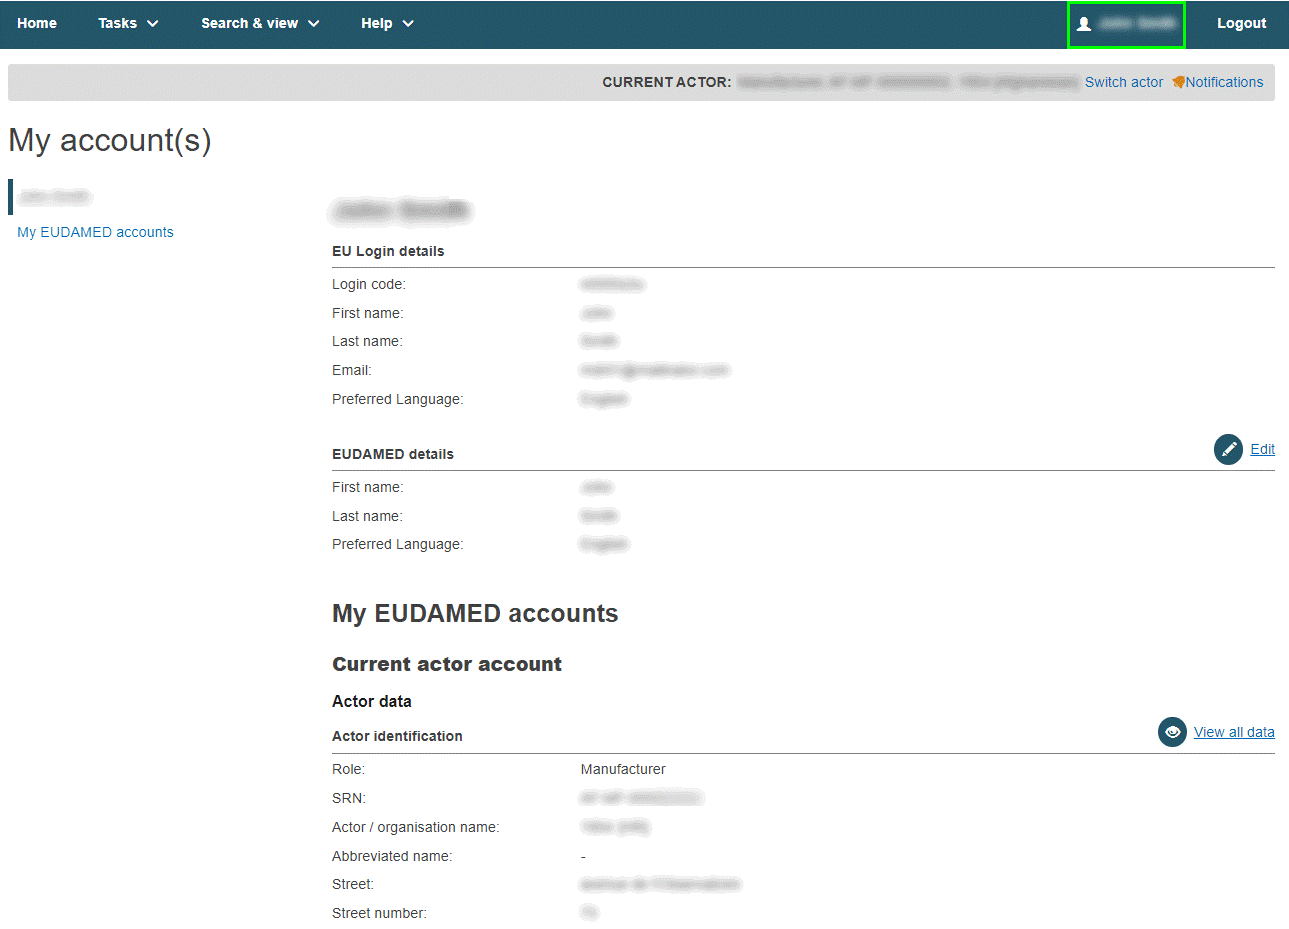 EUDAMED my accounts page